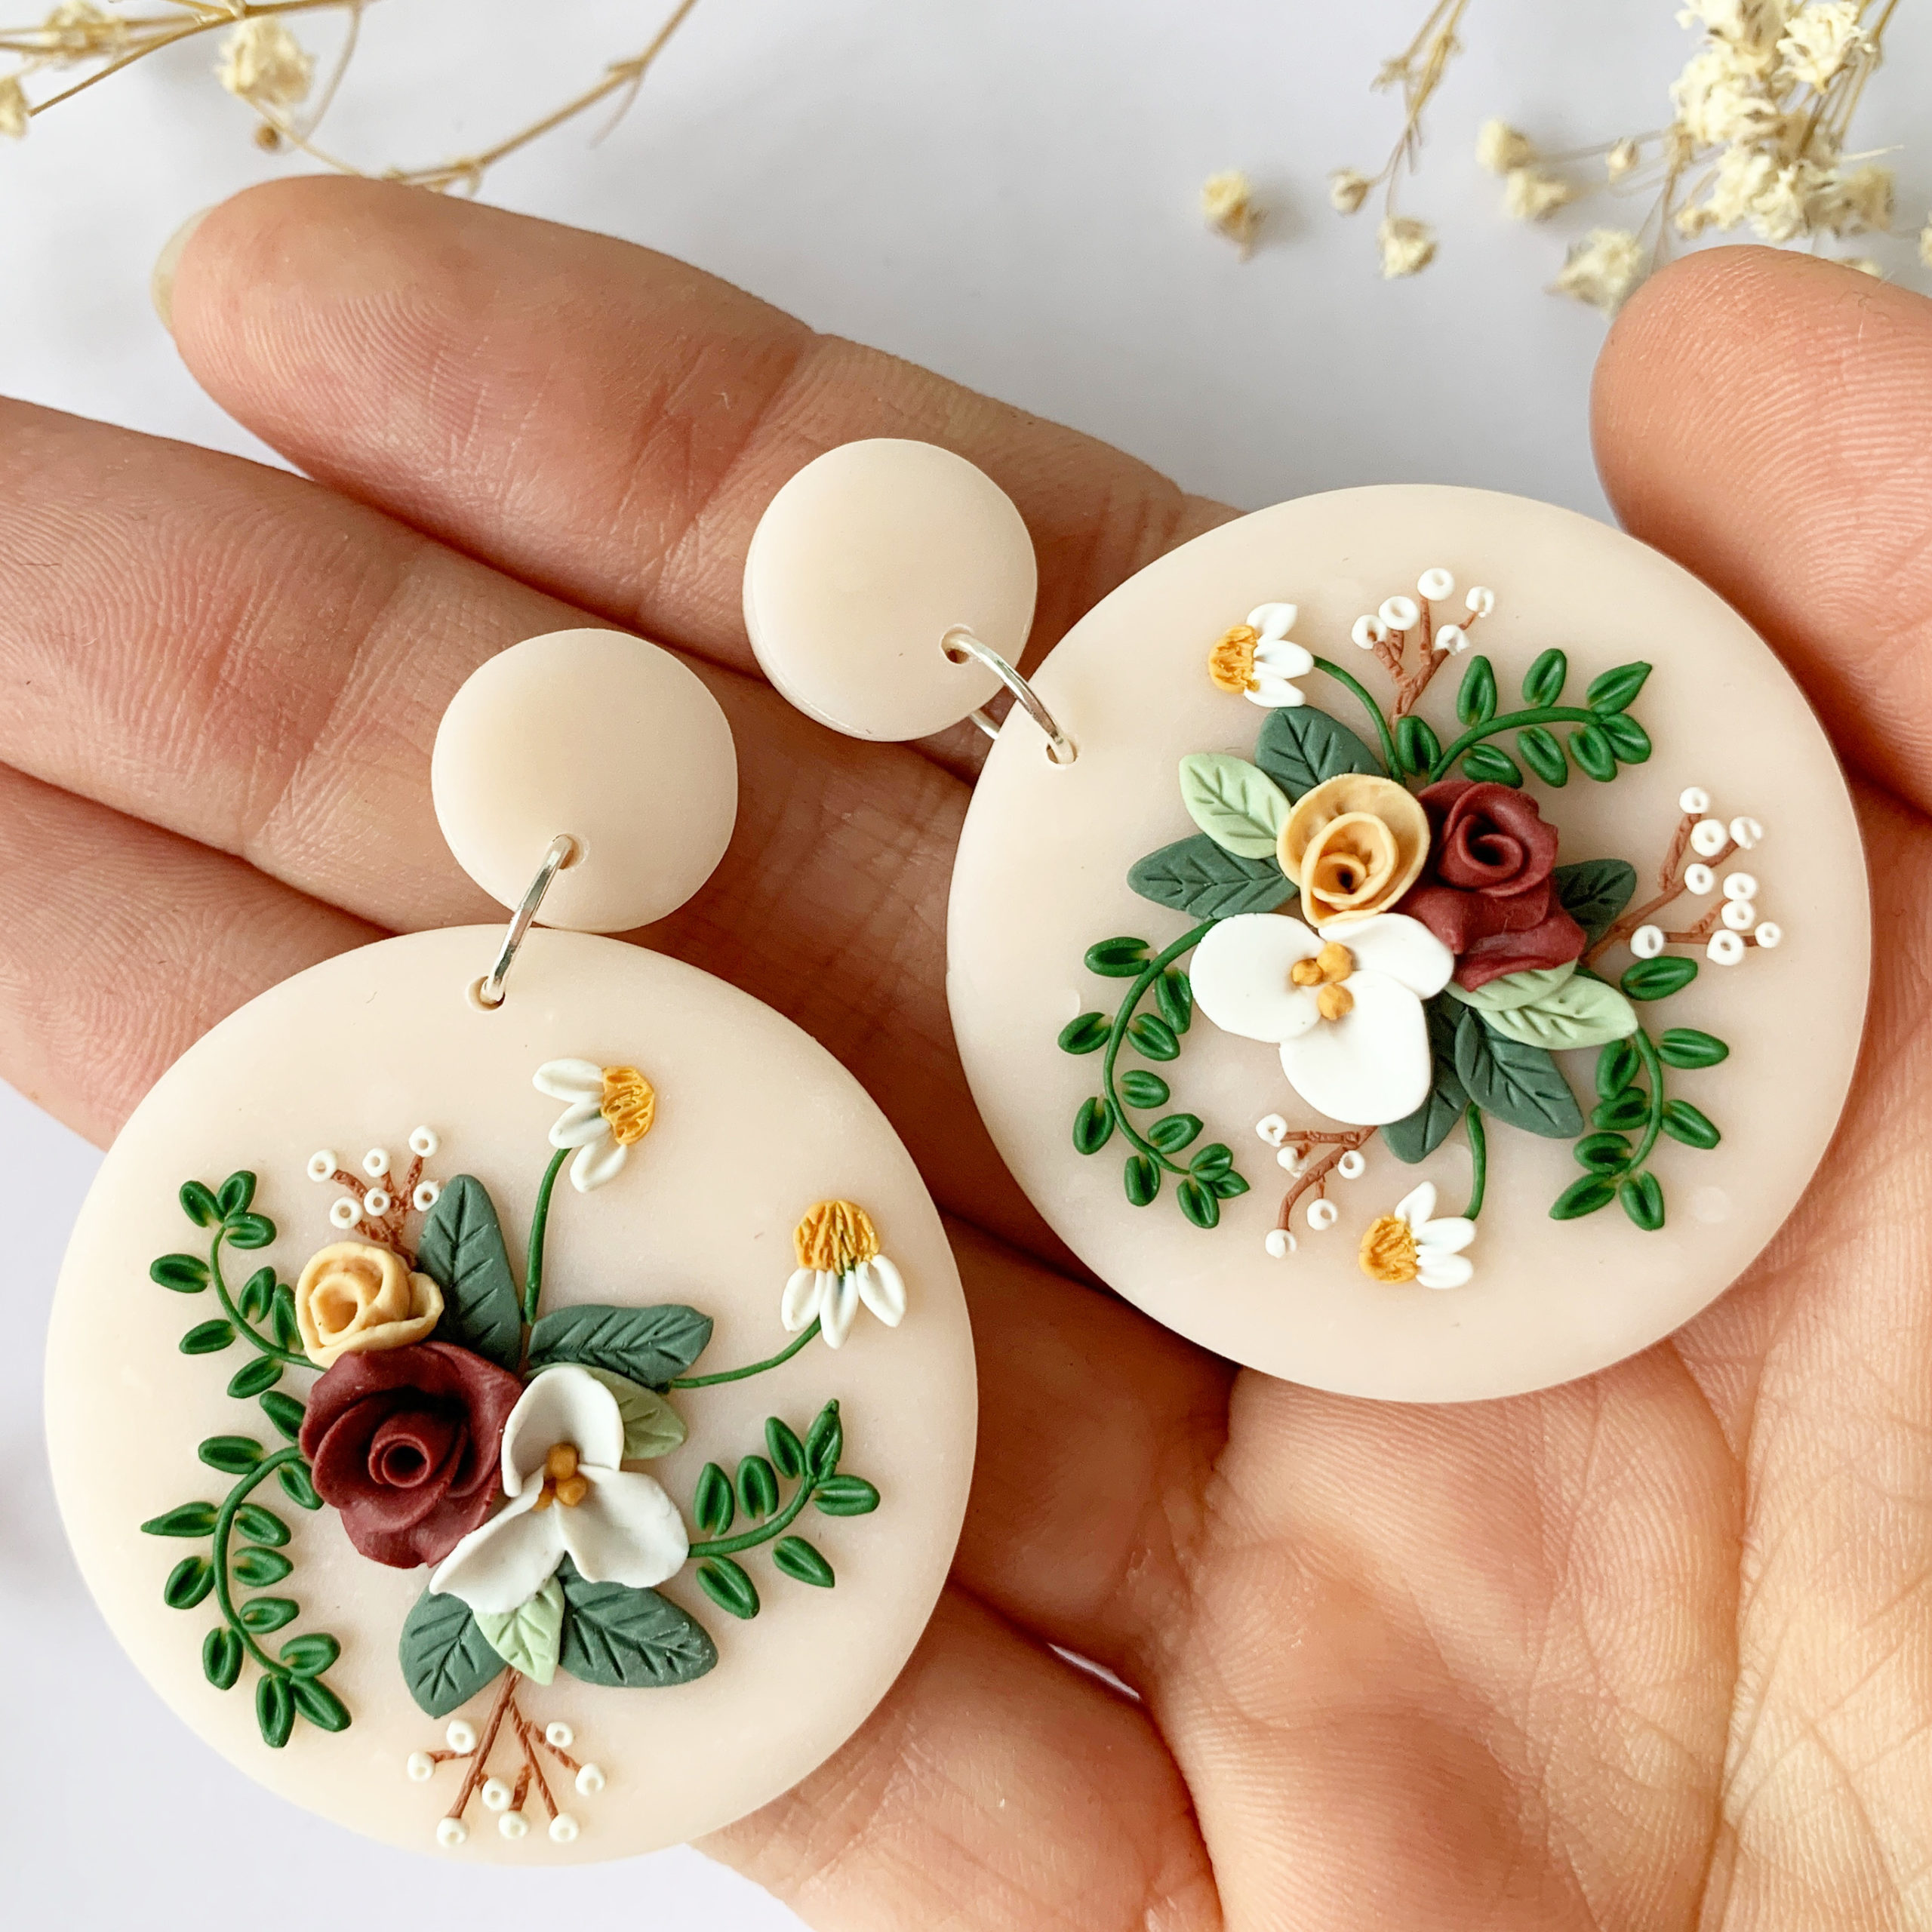 Flower Bouquet  Polymer Clay Embroidery Earrings Tutorial 